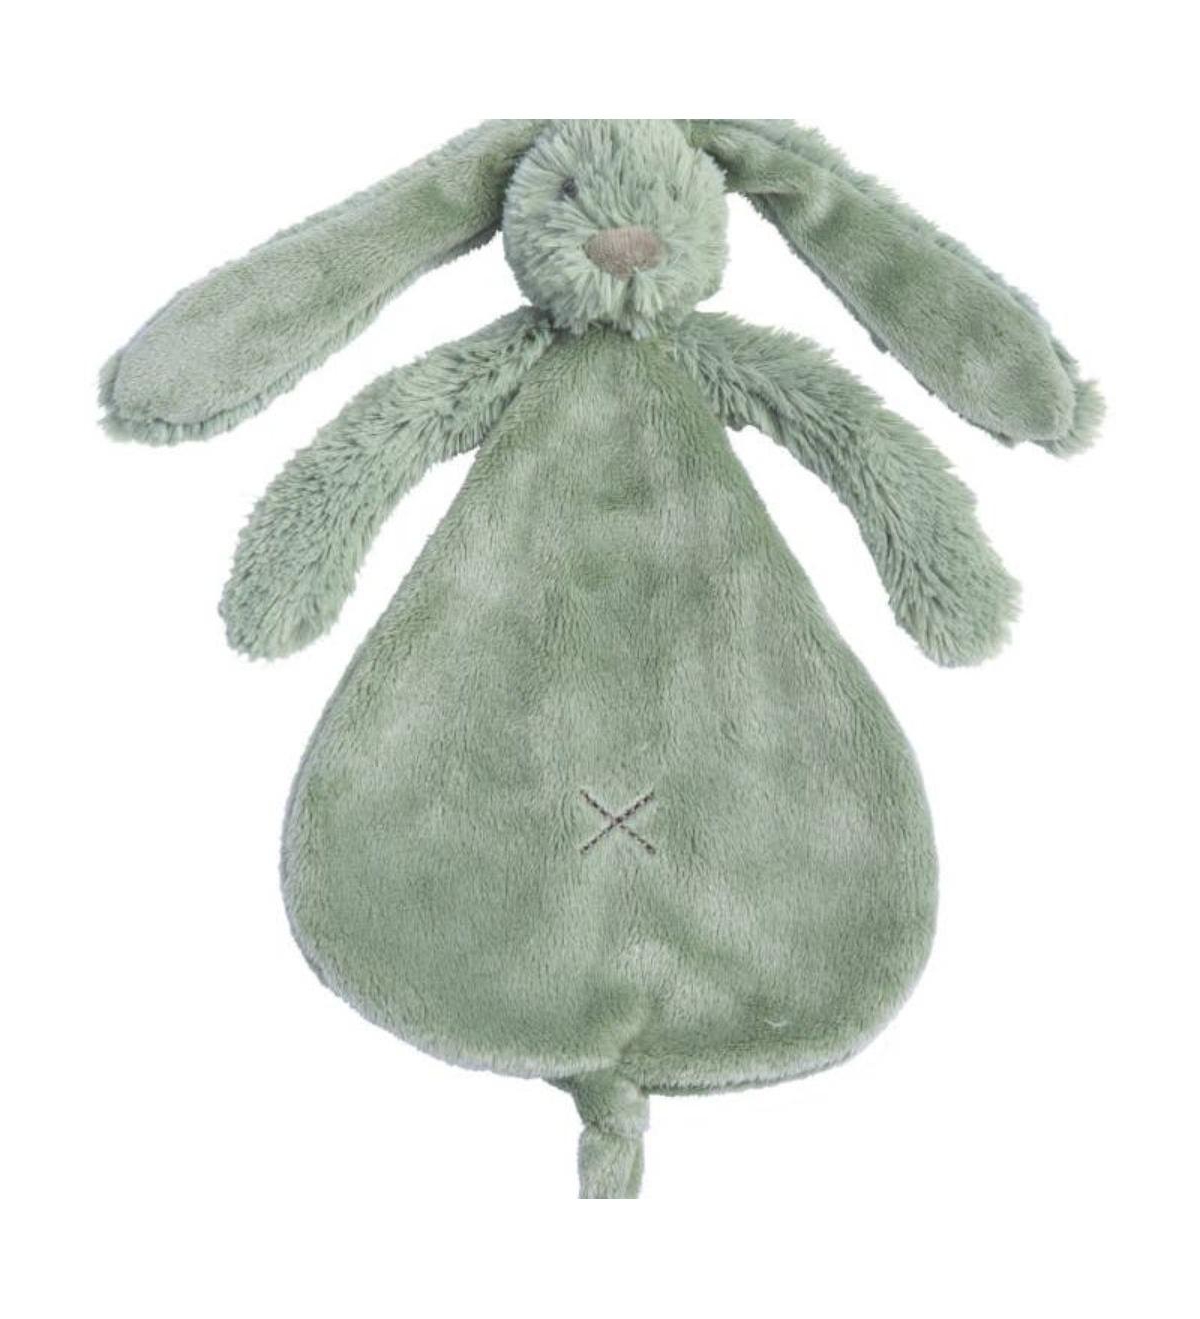 Newcastle Classics Babies' Rabbit Richie Green Tuttle Security Blanket By Happy Horse 10 Inch Plush Animal Toy